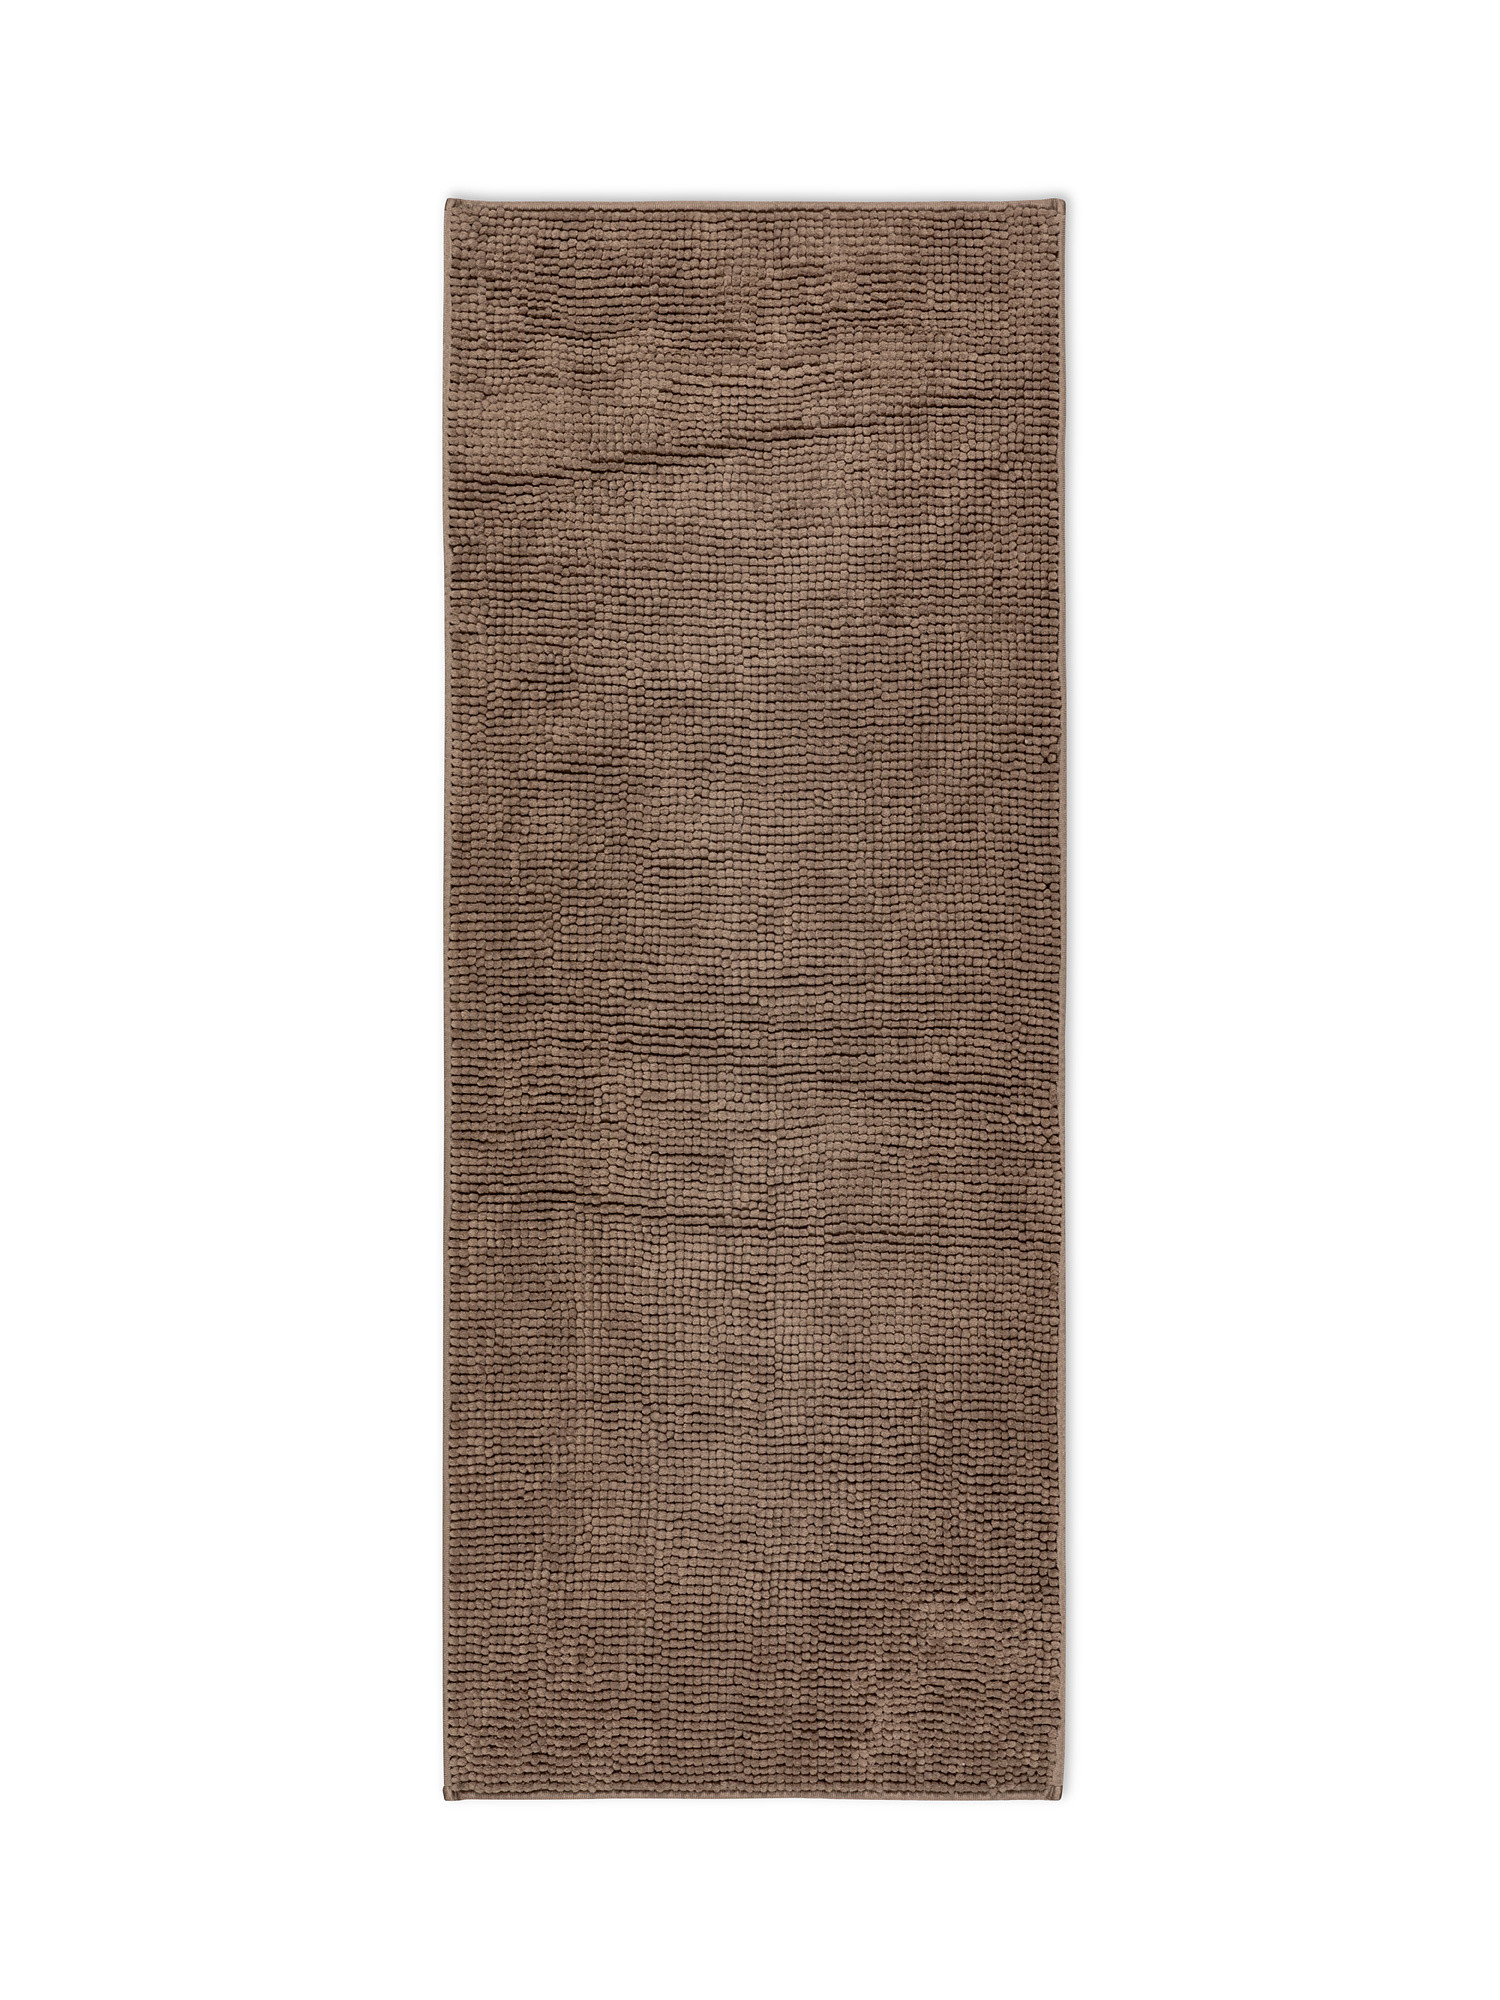 Tappeto bagno stile shaggy, Beige scuro, large image number 0